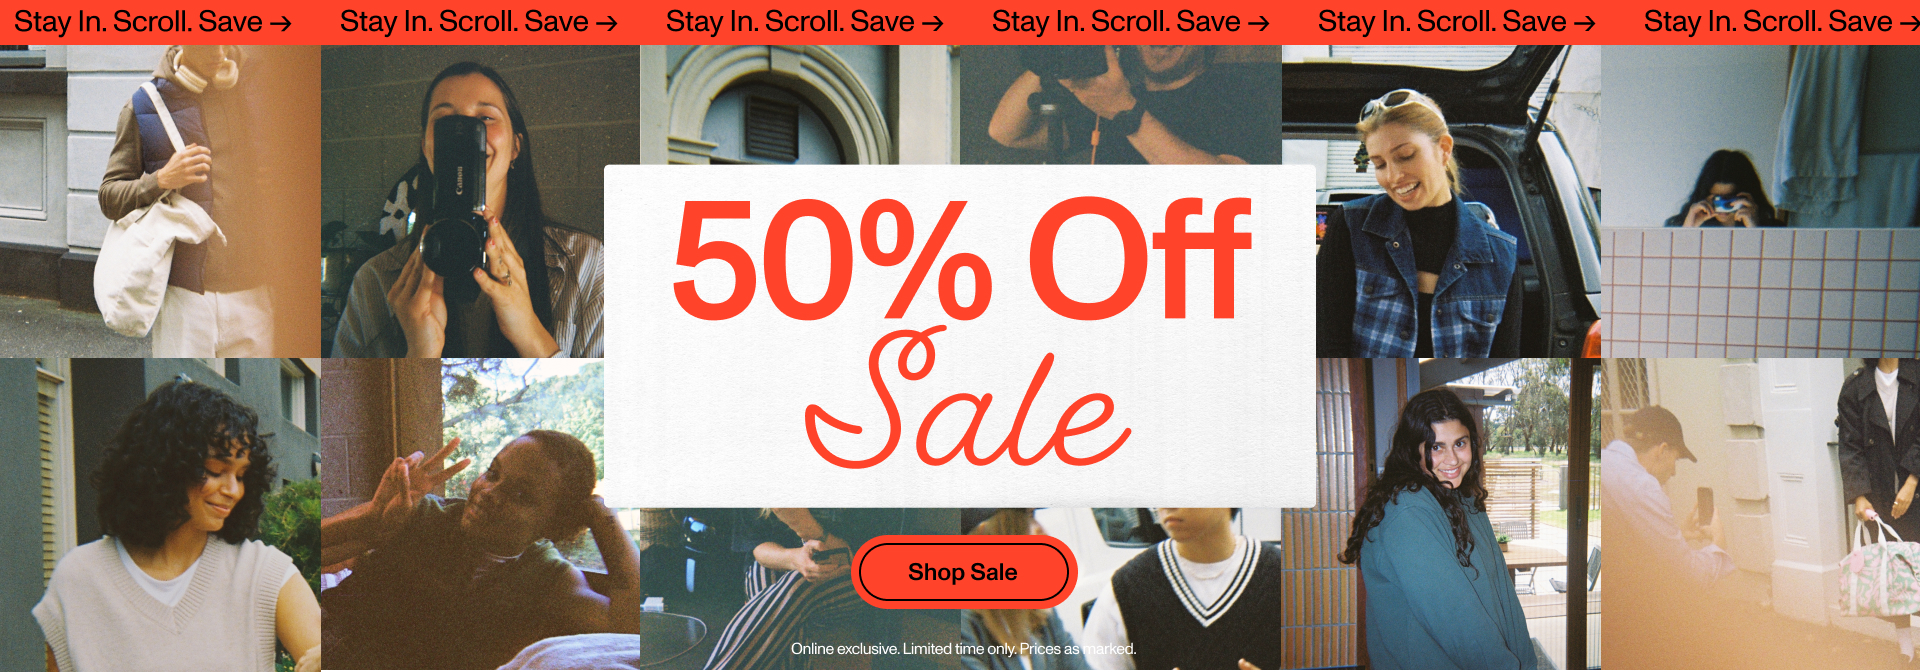 Stay In. Scroll. Save. 50% Off Sale. Shop Sale